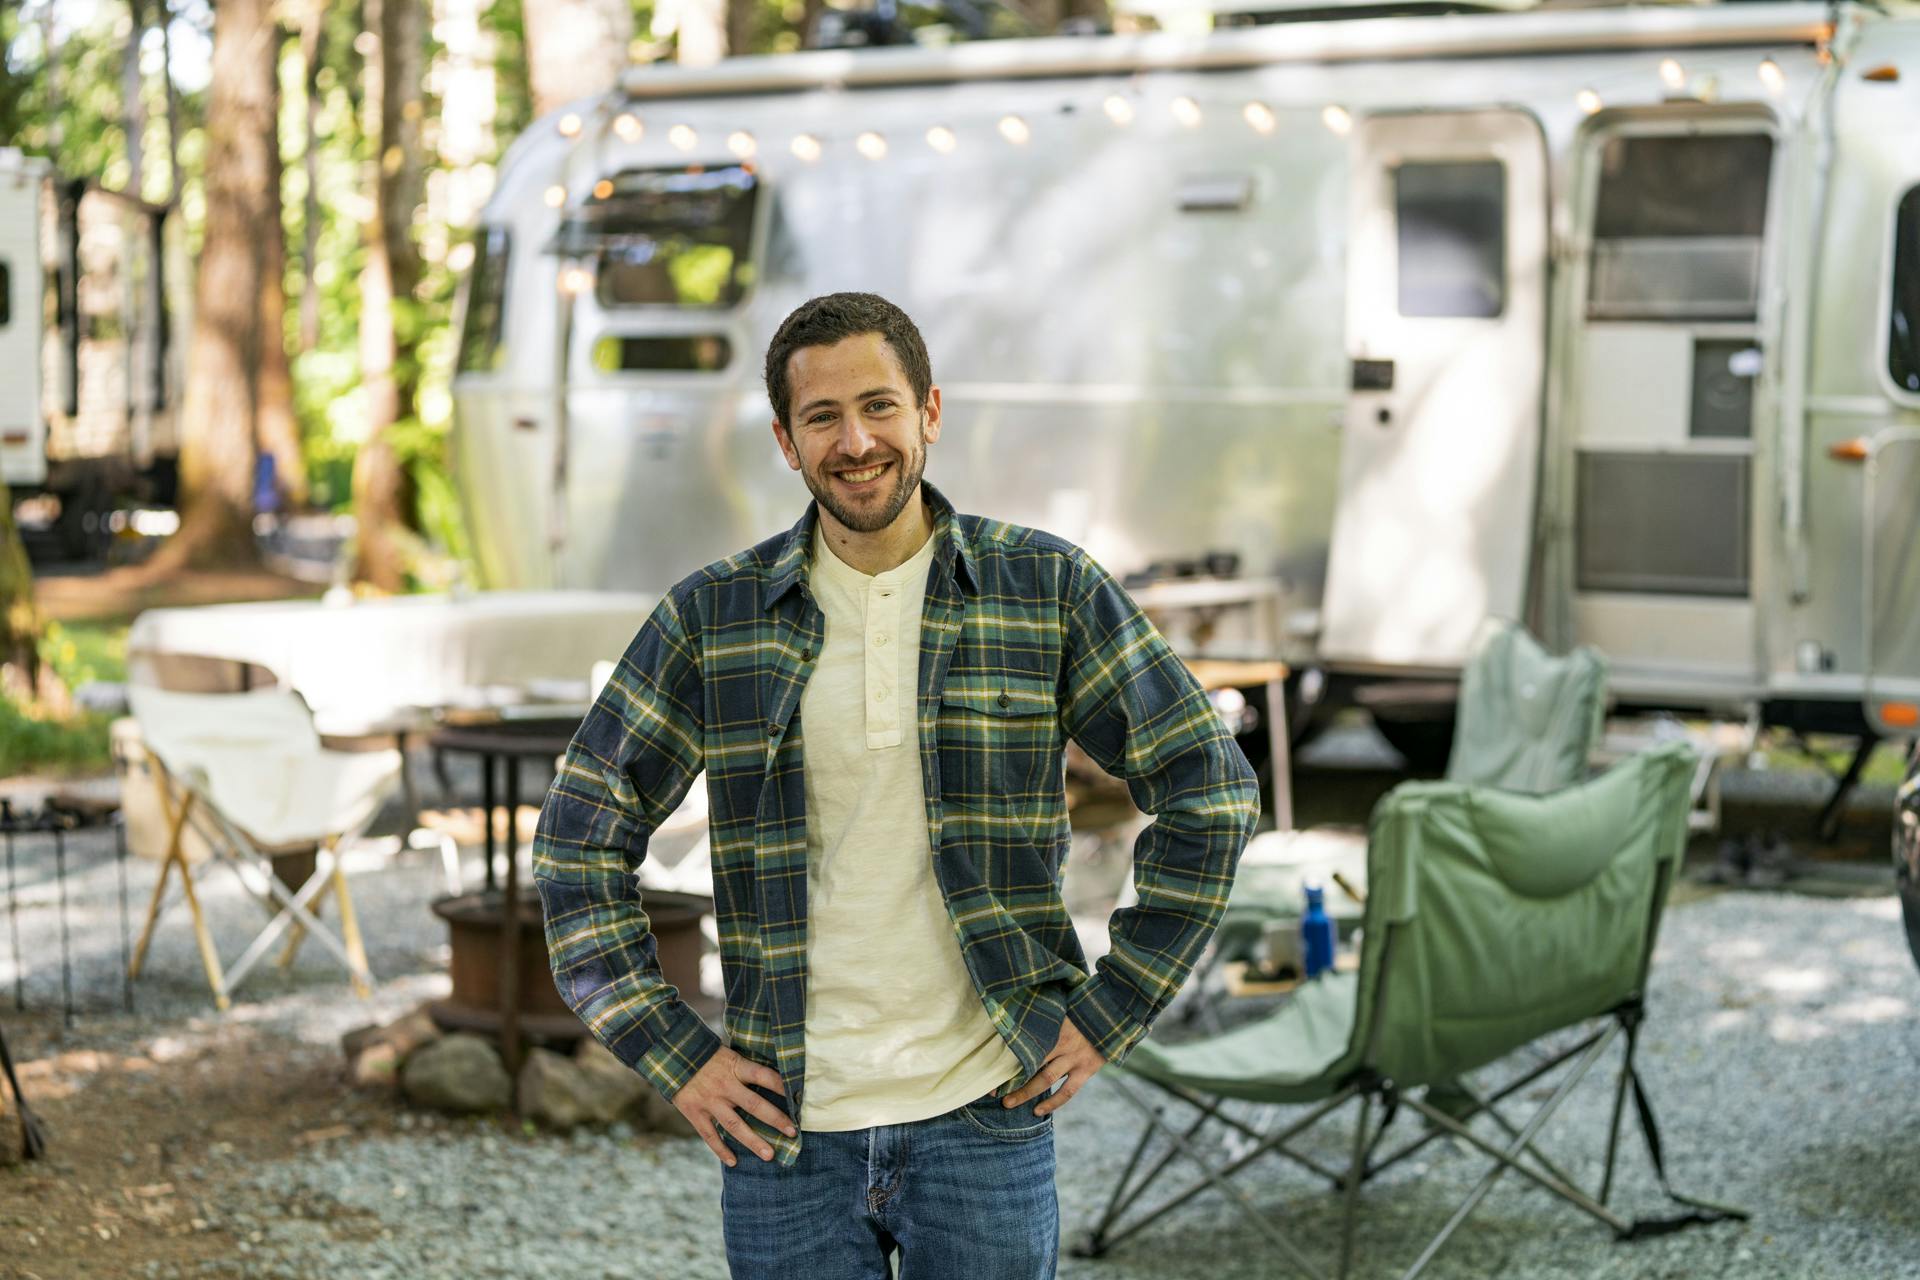 Campspot’s CEO Experiences the RV Lifestyle Firsthand